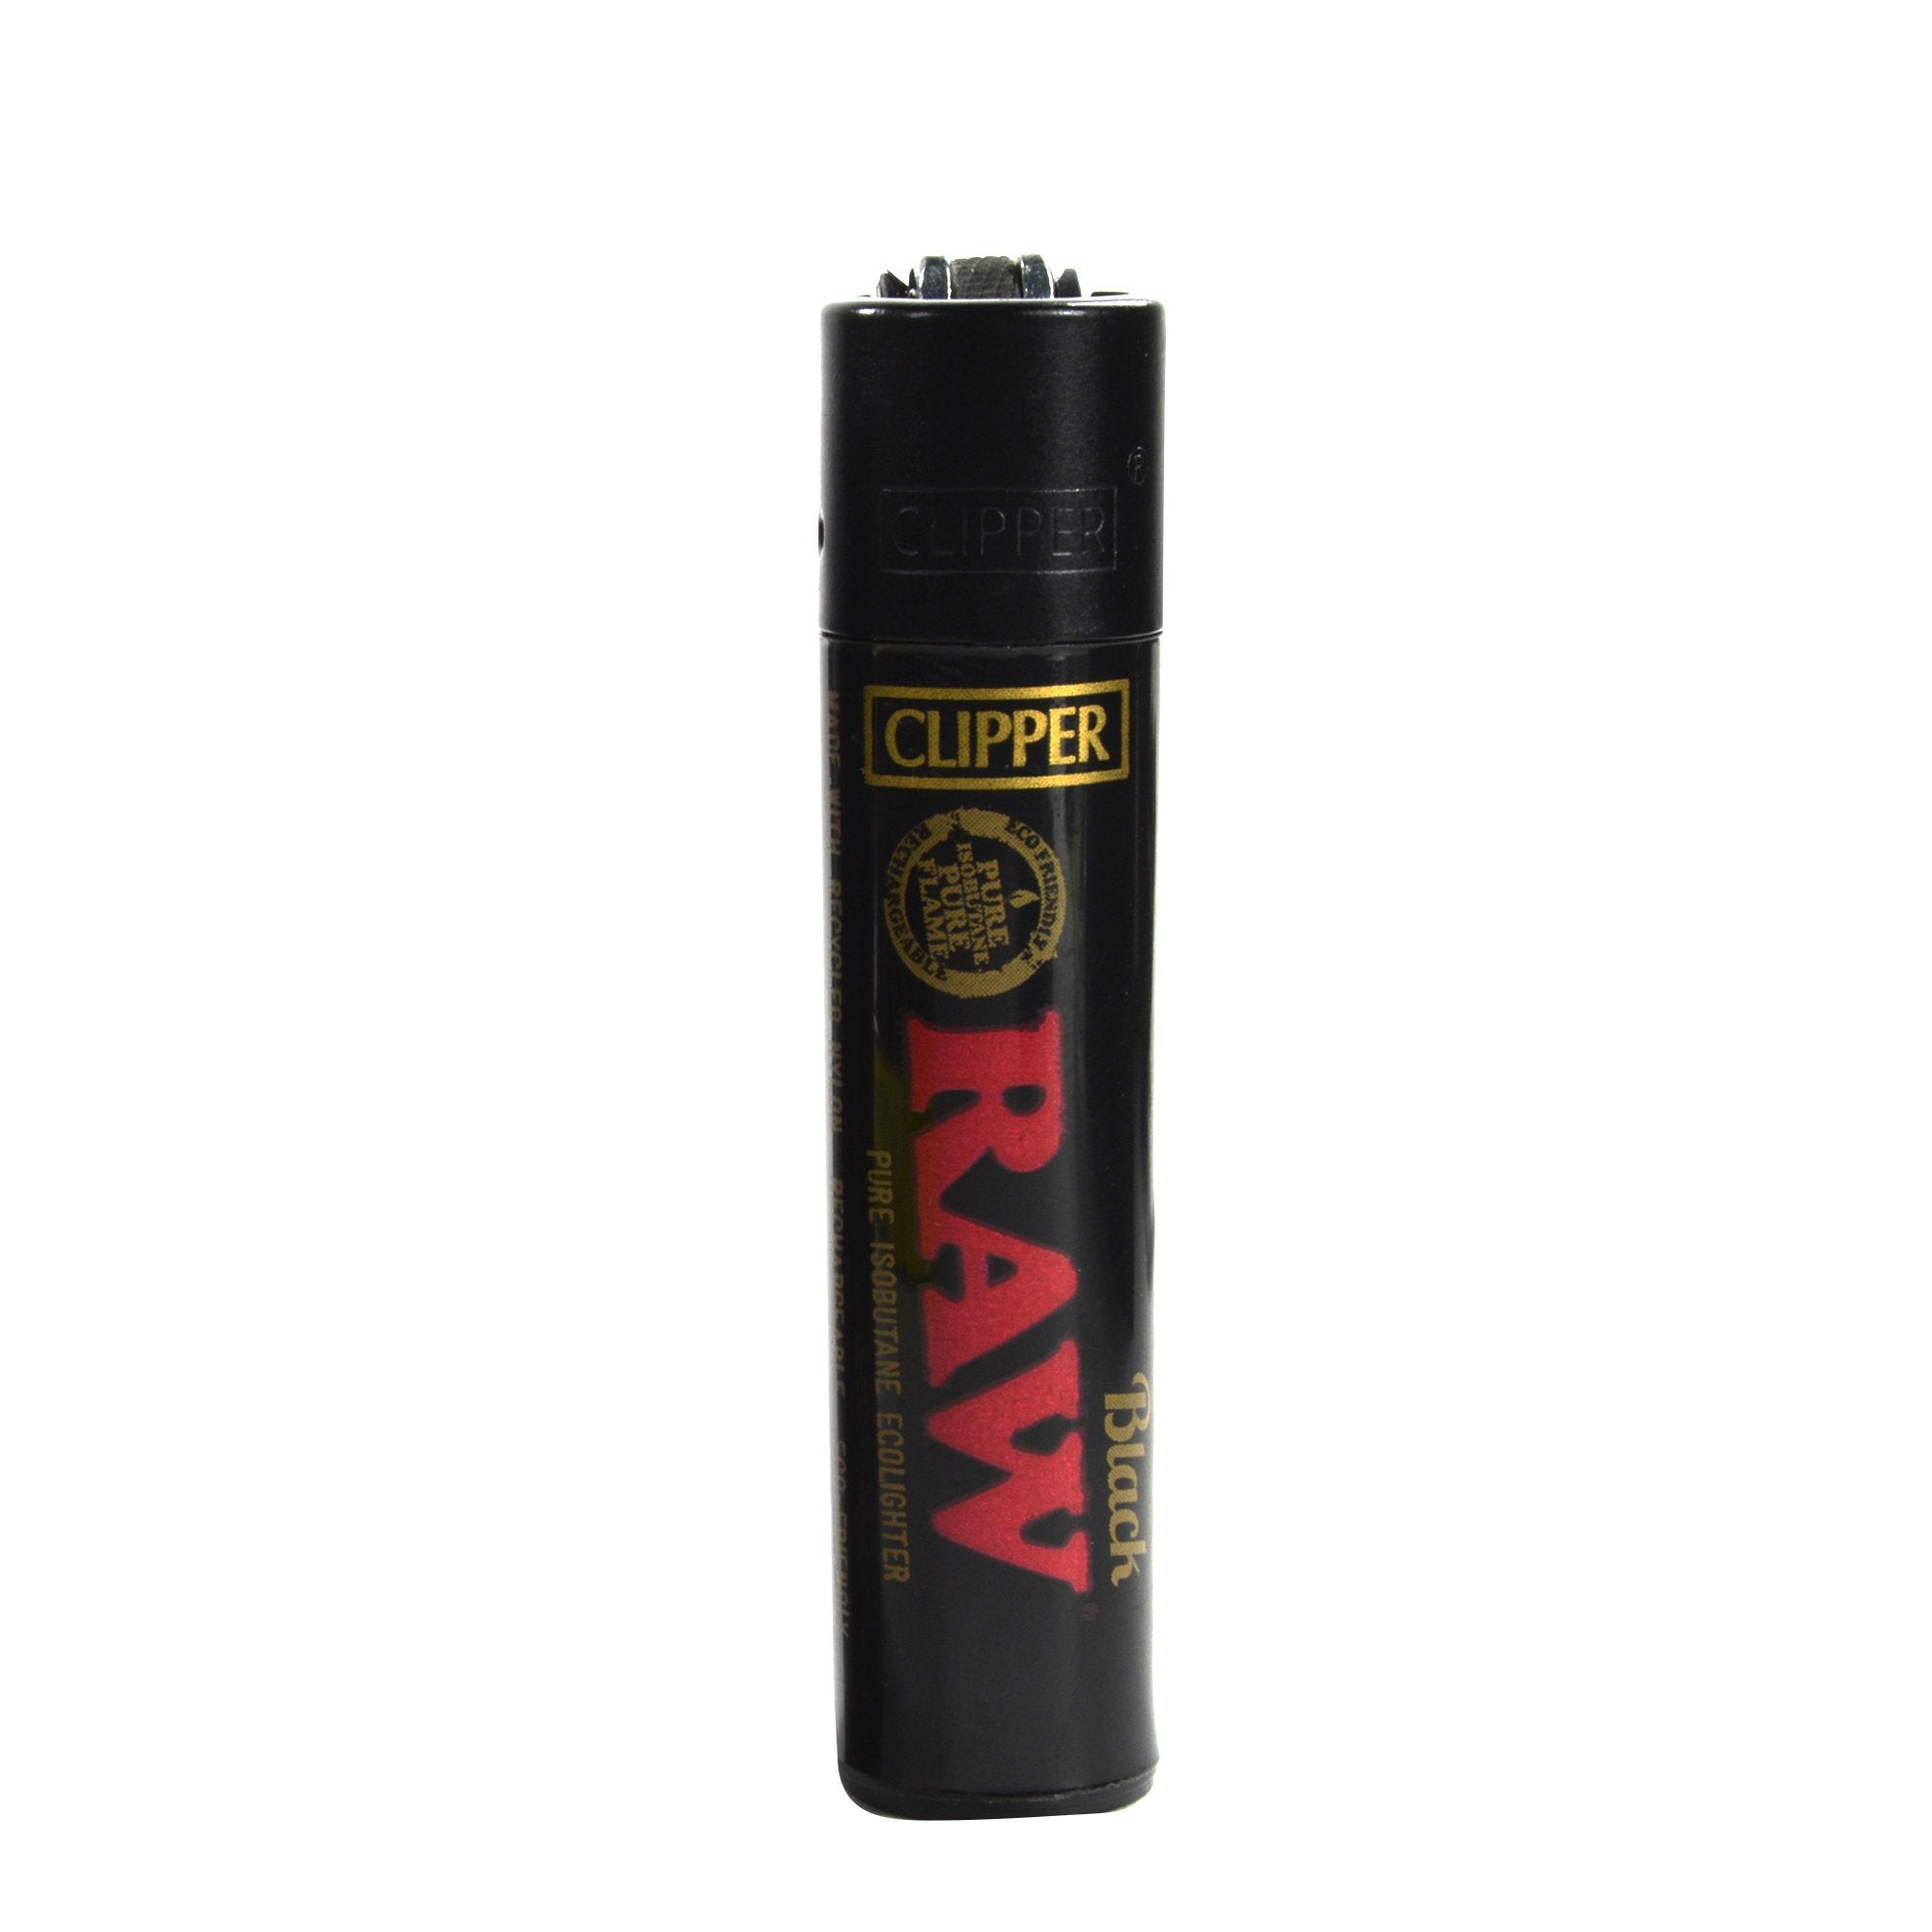 CLIPPER | 'Retail Display' Lighter RAW Logo Black & Gold - 48 Count - 2